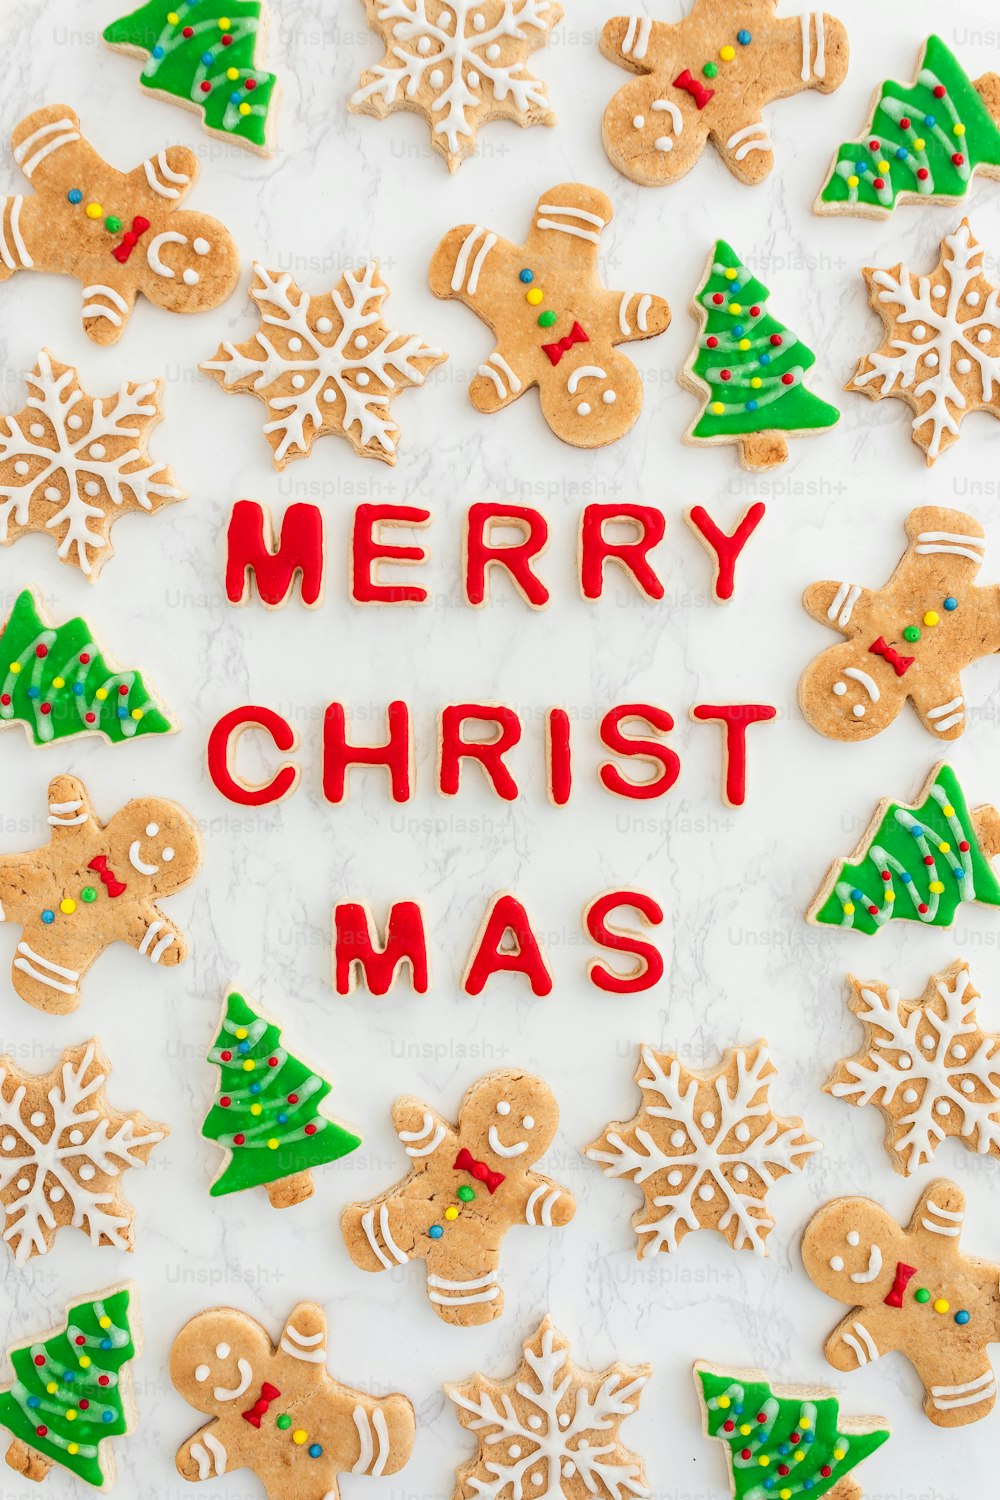 a merry christmas message surrounded by decorated cookies